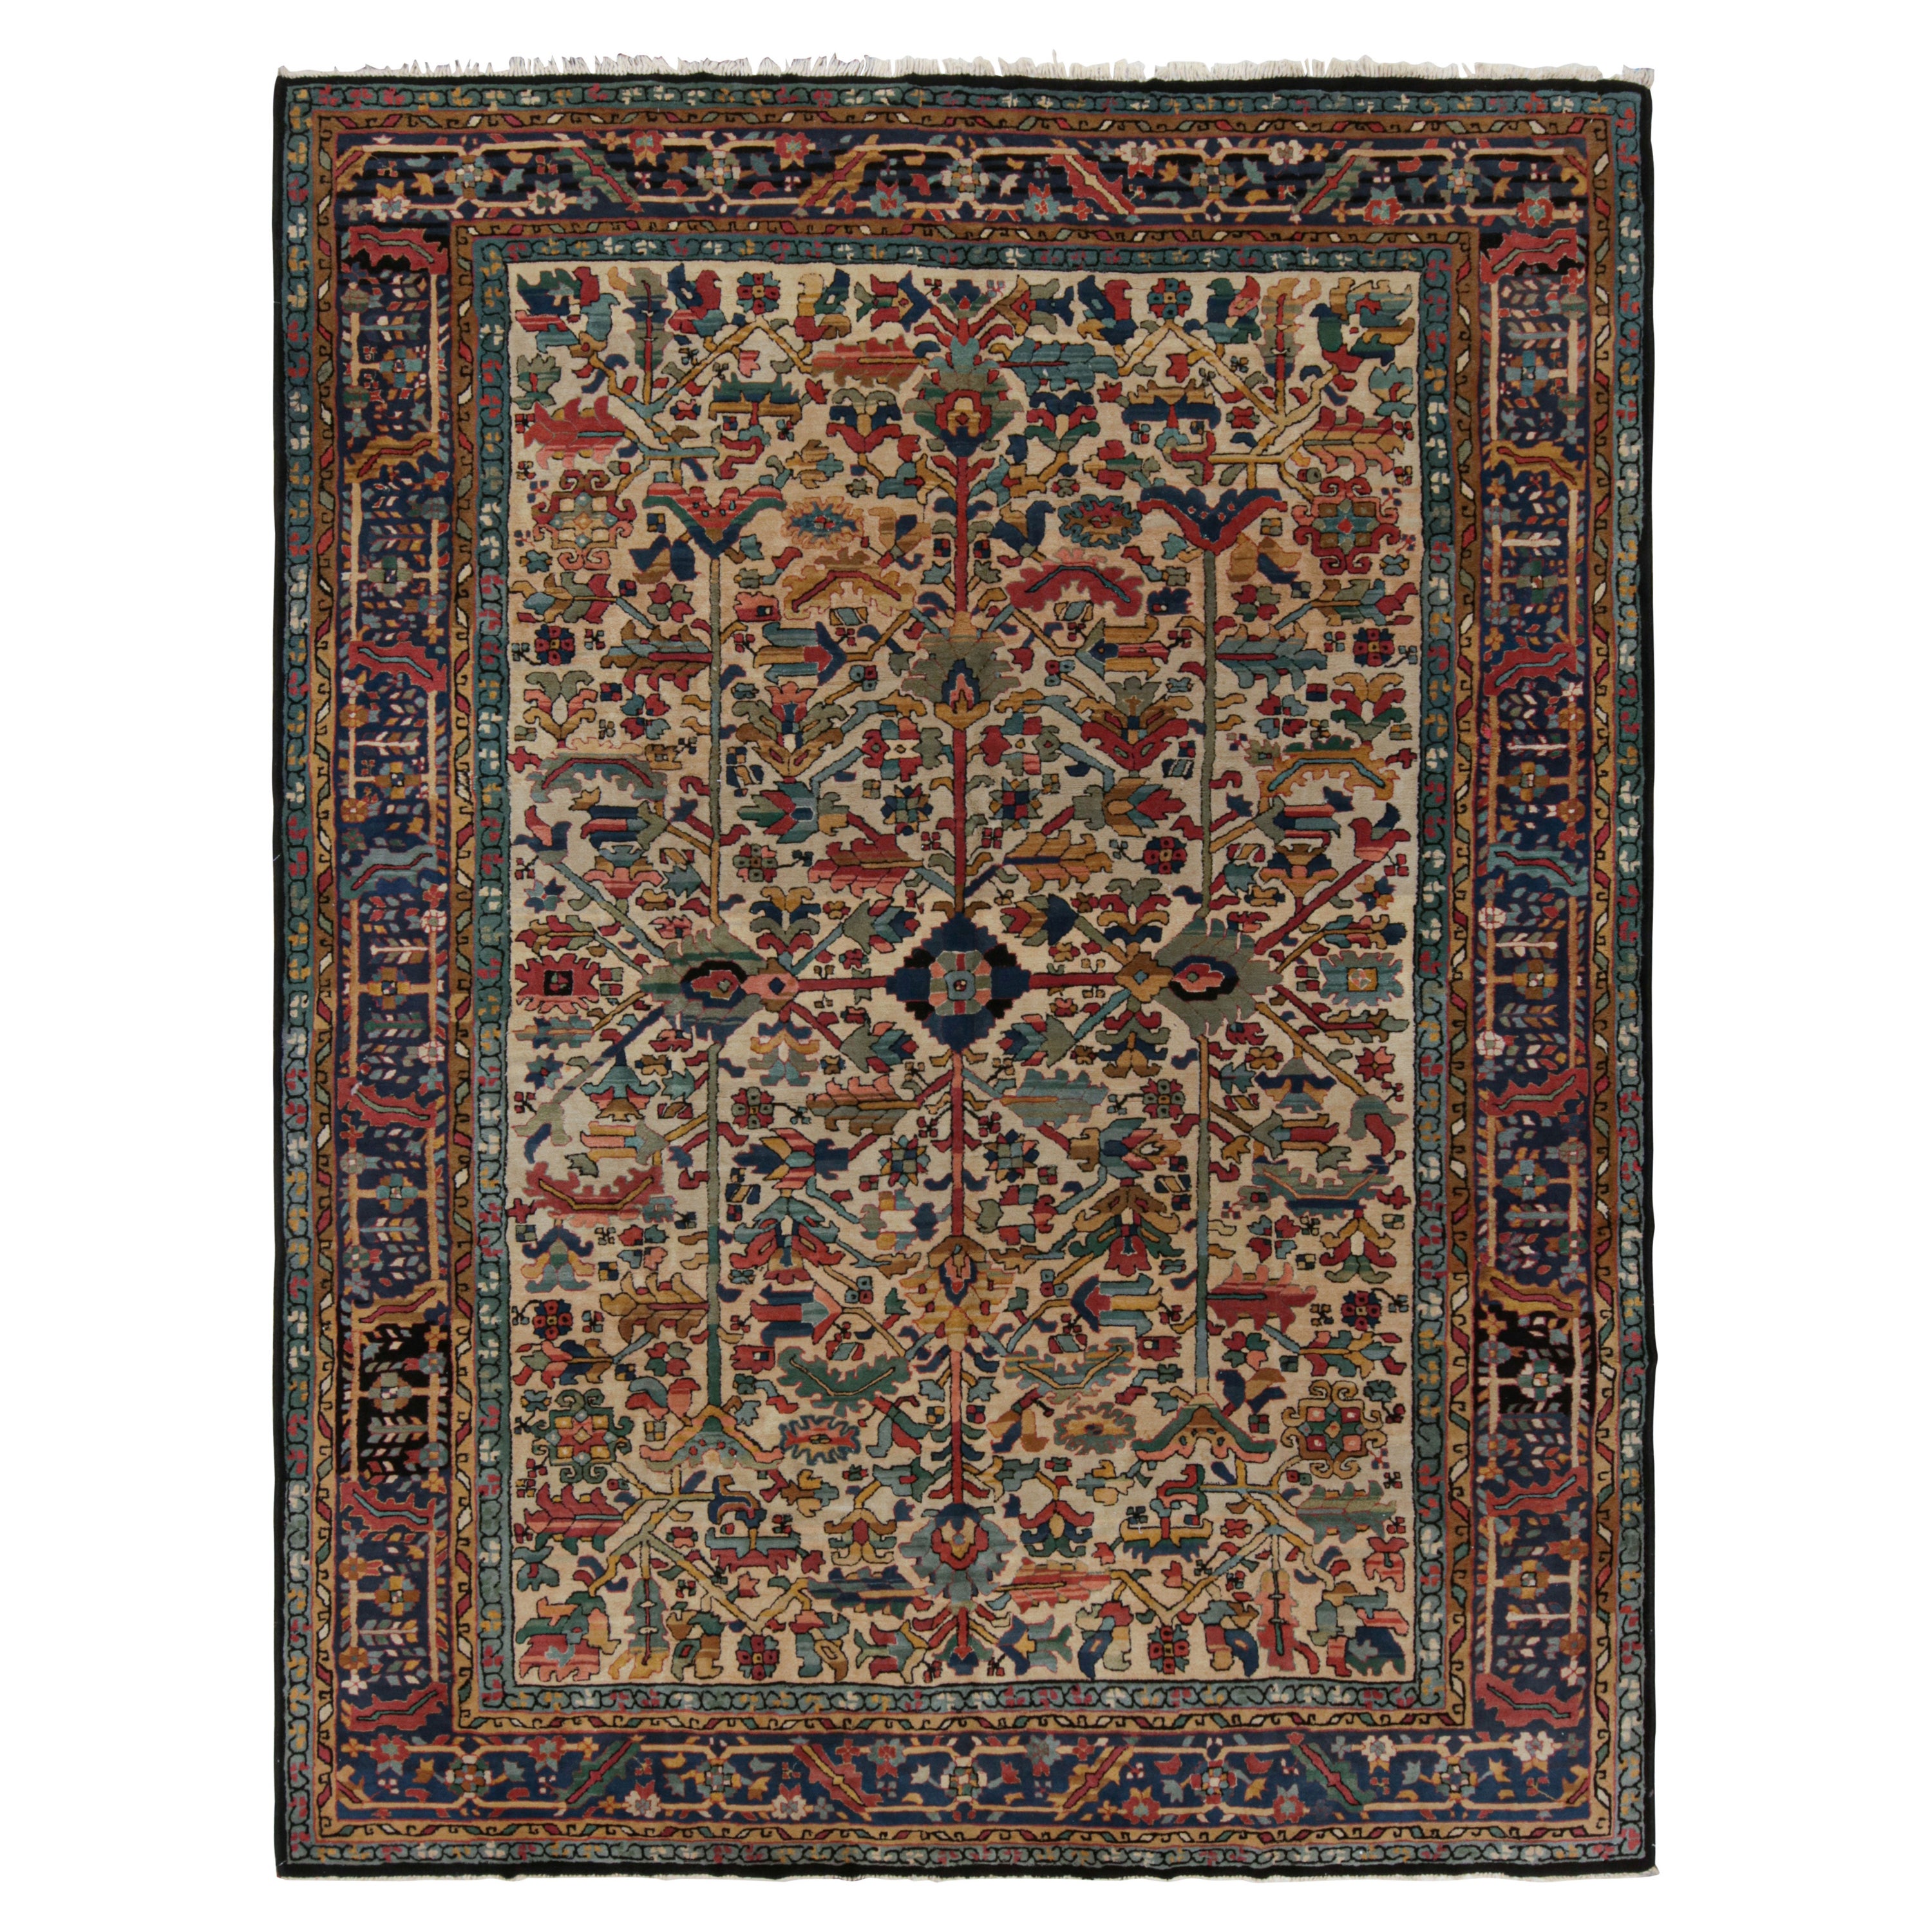 intage European Rug in Polychromatic Geometric Patterns, from Rug & Kilim For Sale